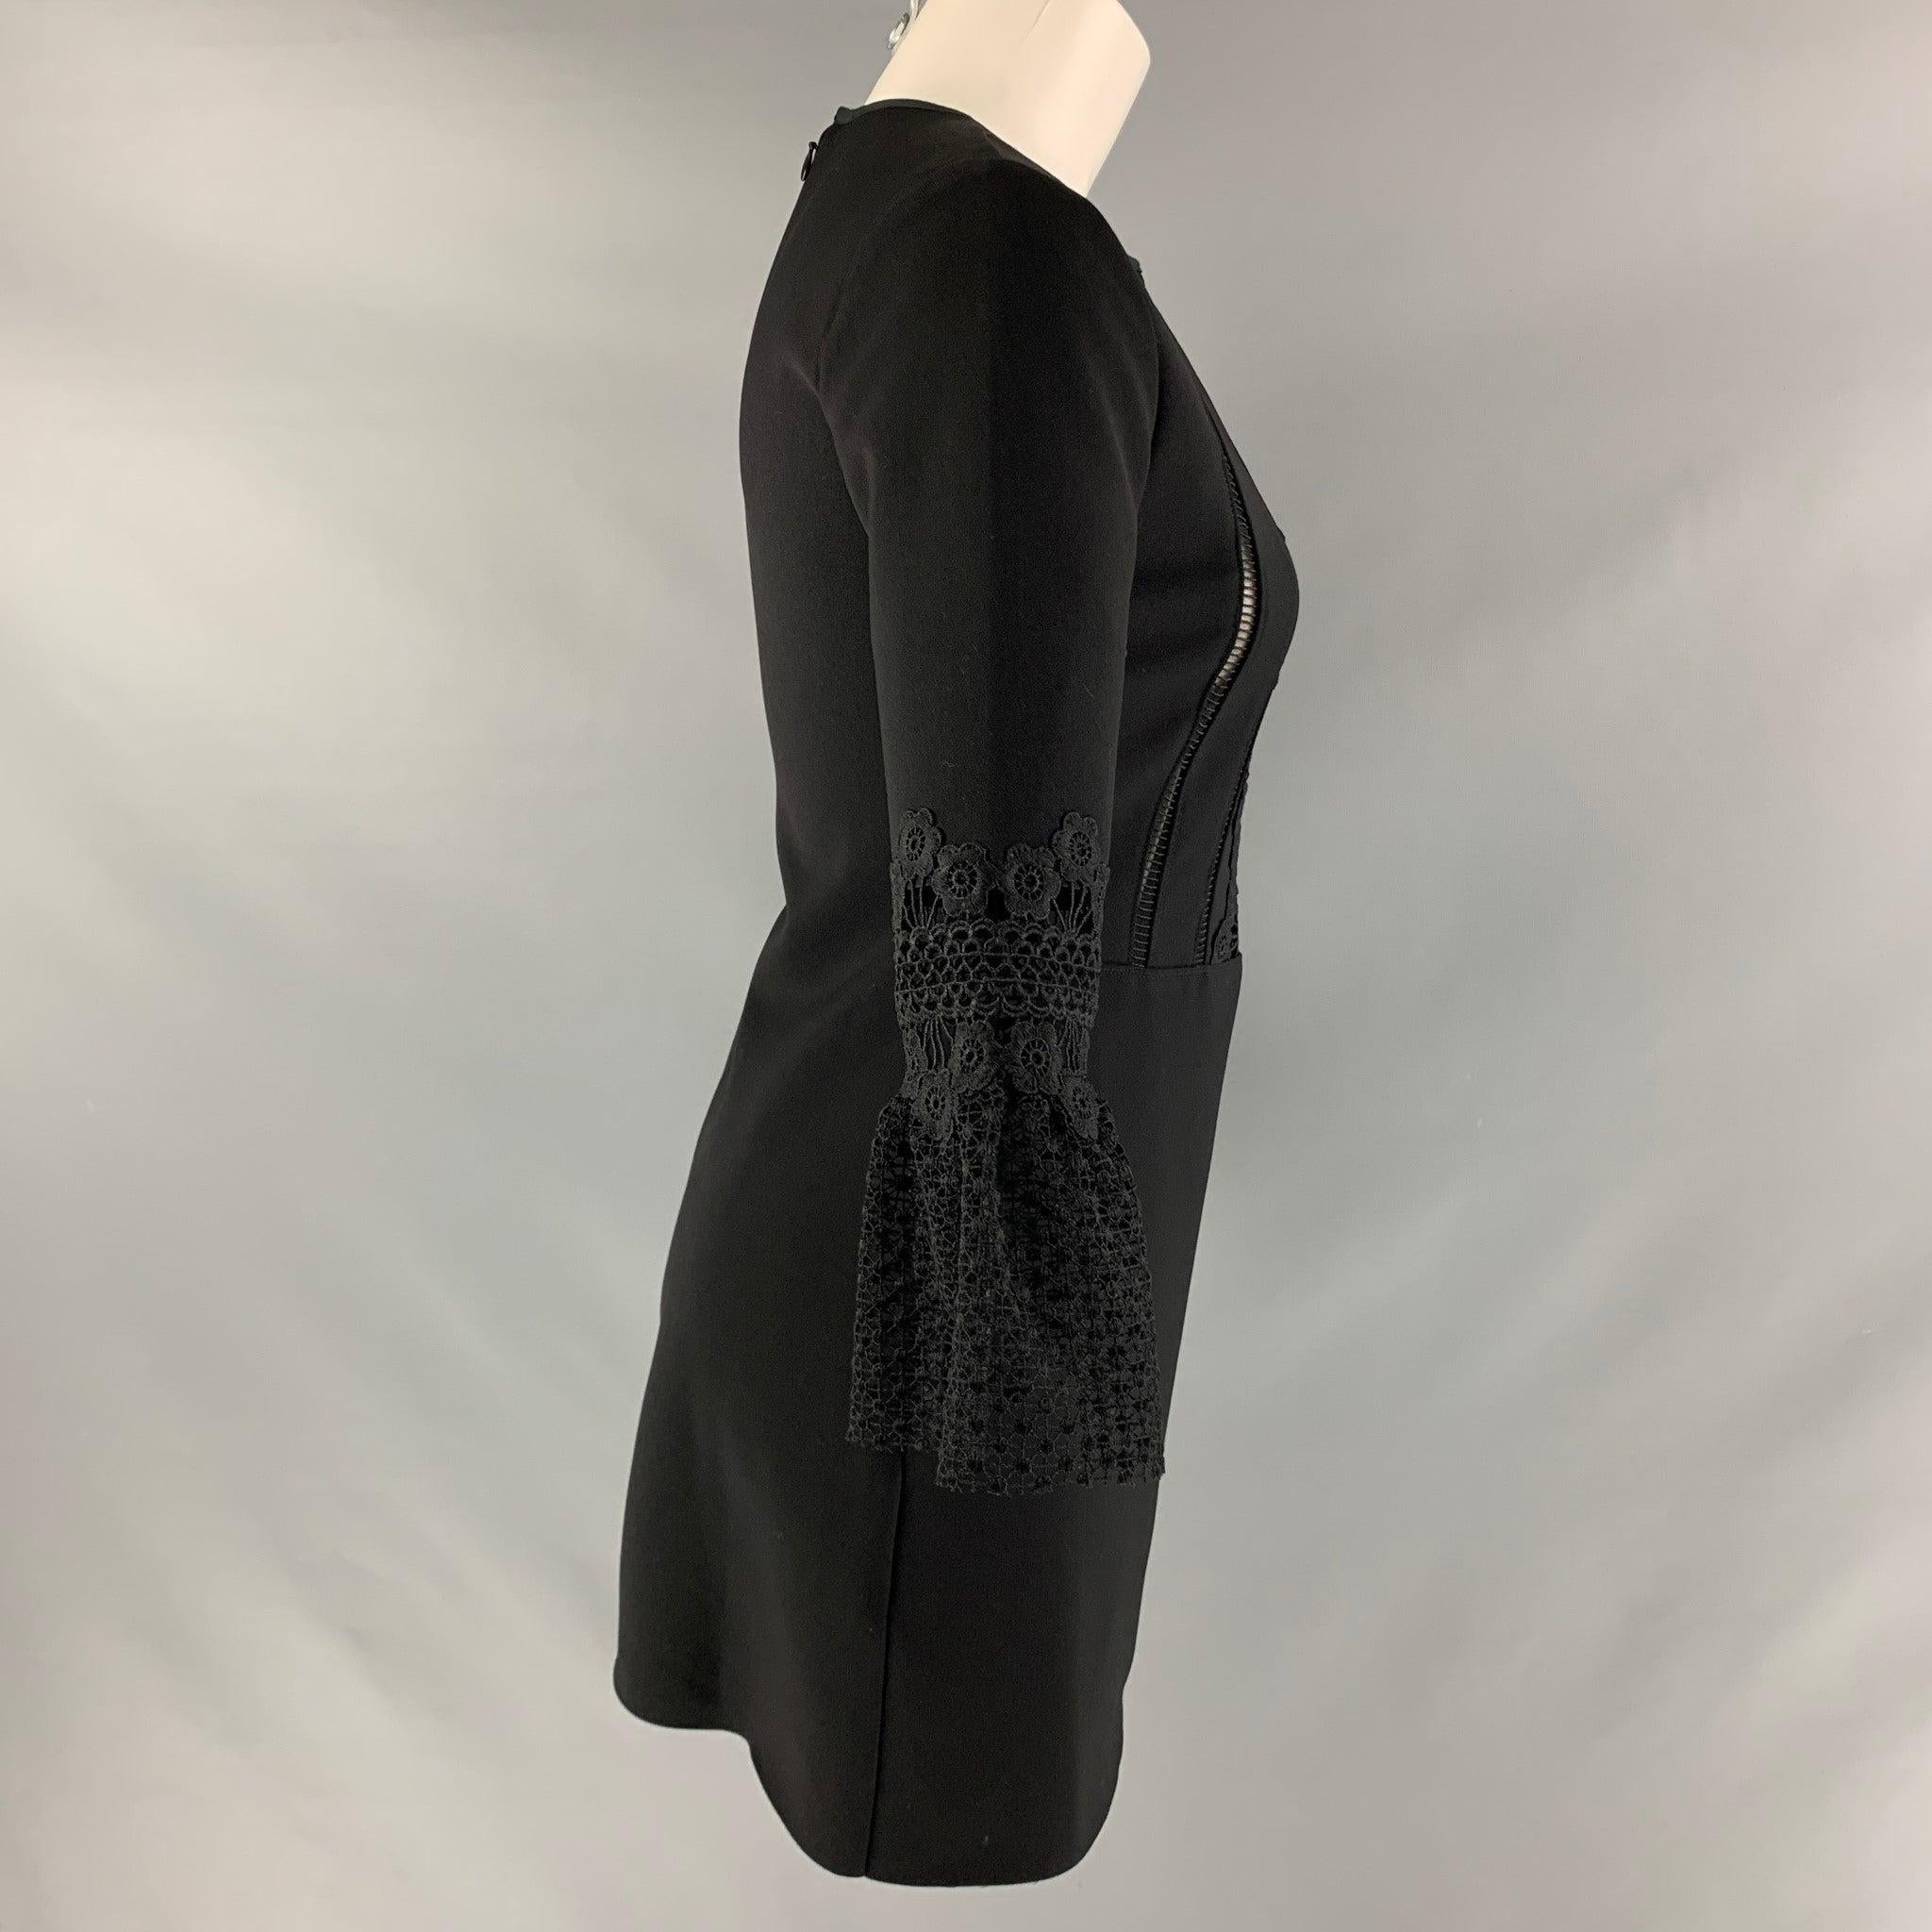 SELF-PORTRAIT dress comes in a black polyester fabric featuring an a-line style, see through panel, long sleeves, and an invisible zip up closure at center back. Excellent Pre-Owned Condition. 

Marked:   4 

Measurements: 
 
Shoulder: 14.5 inches